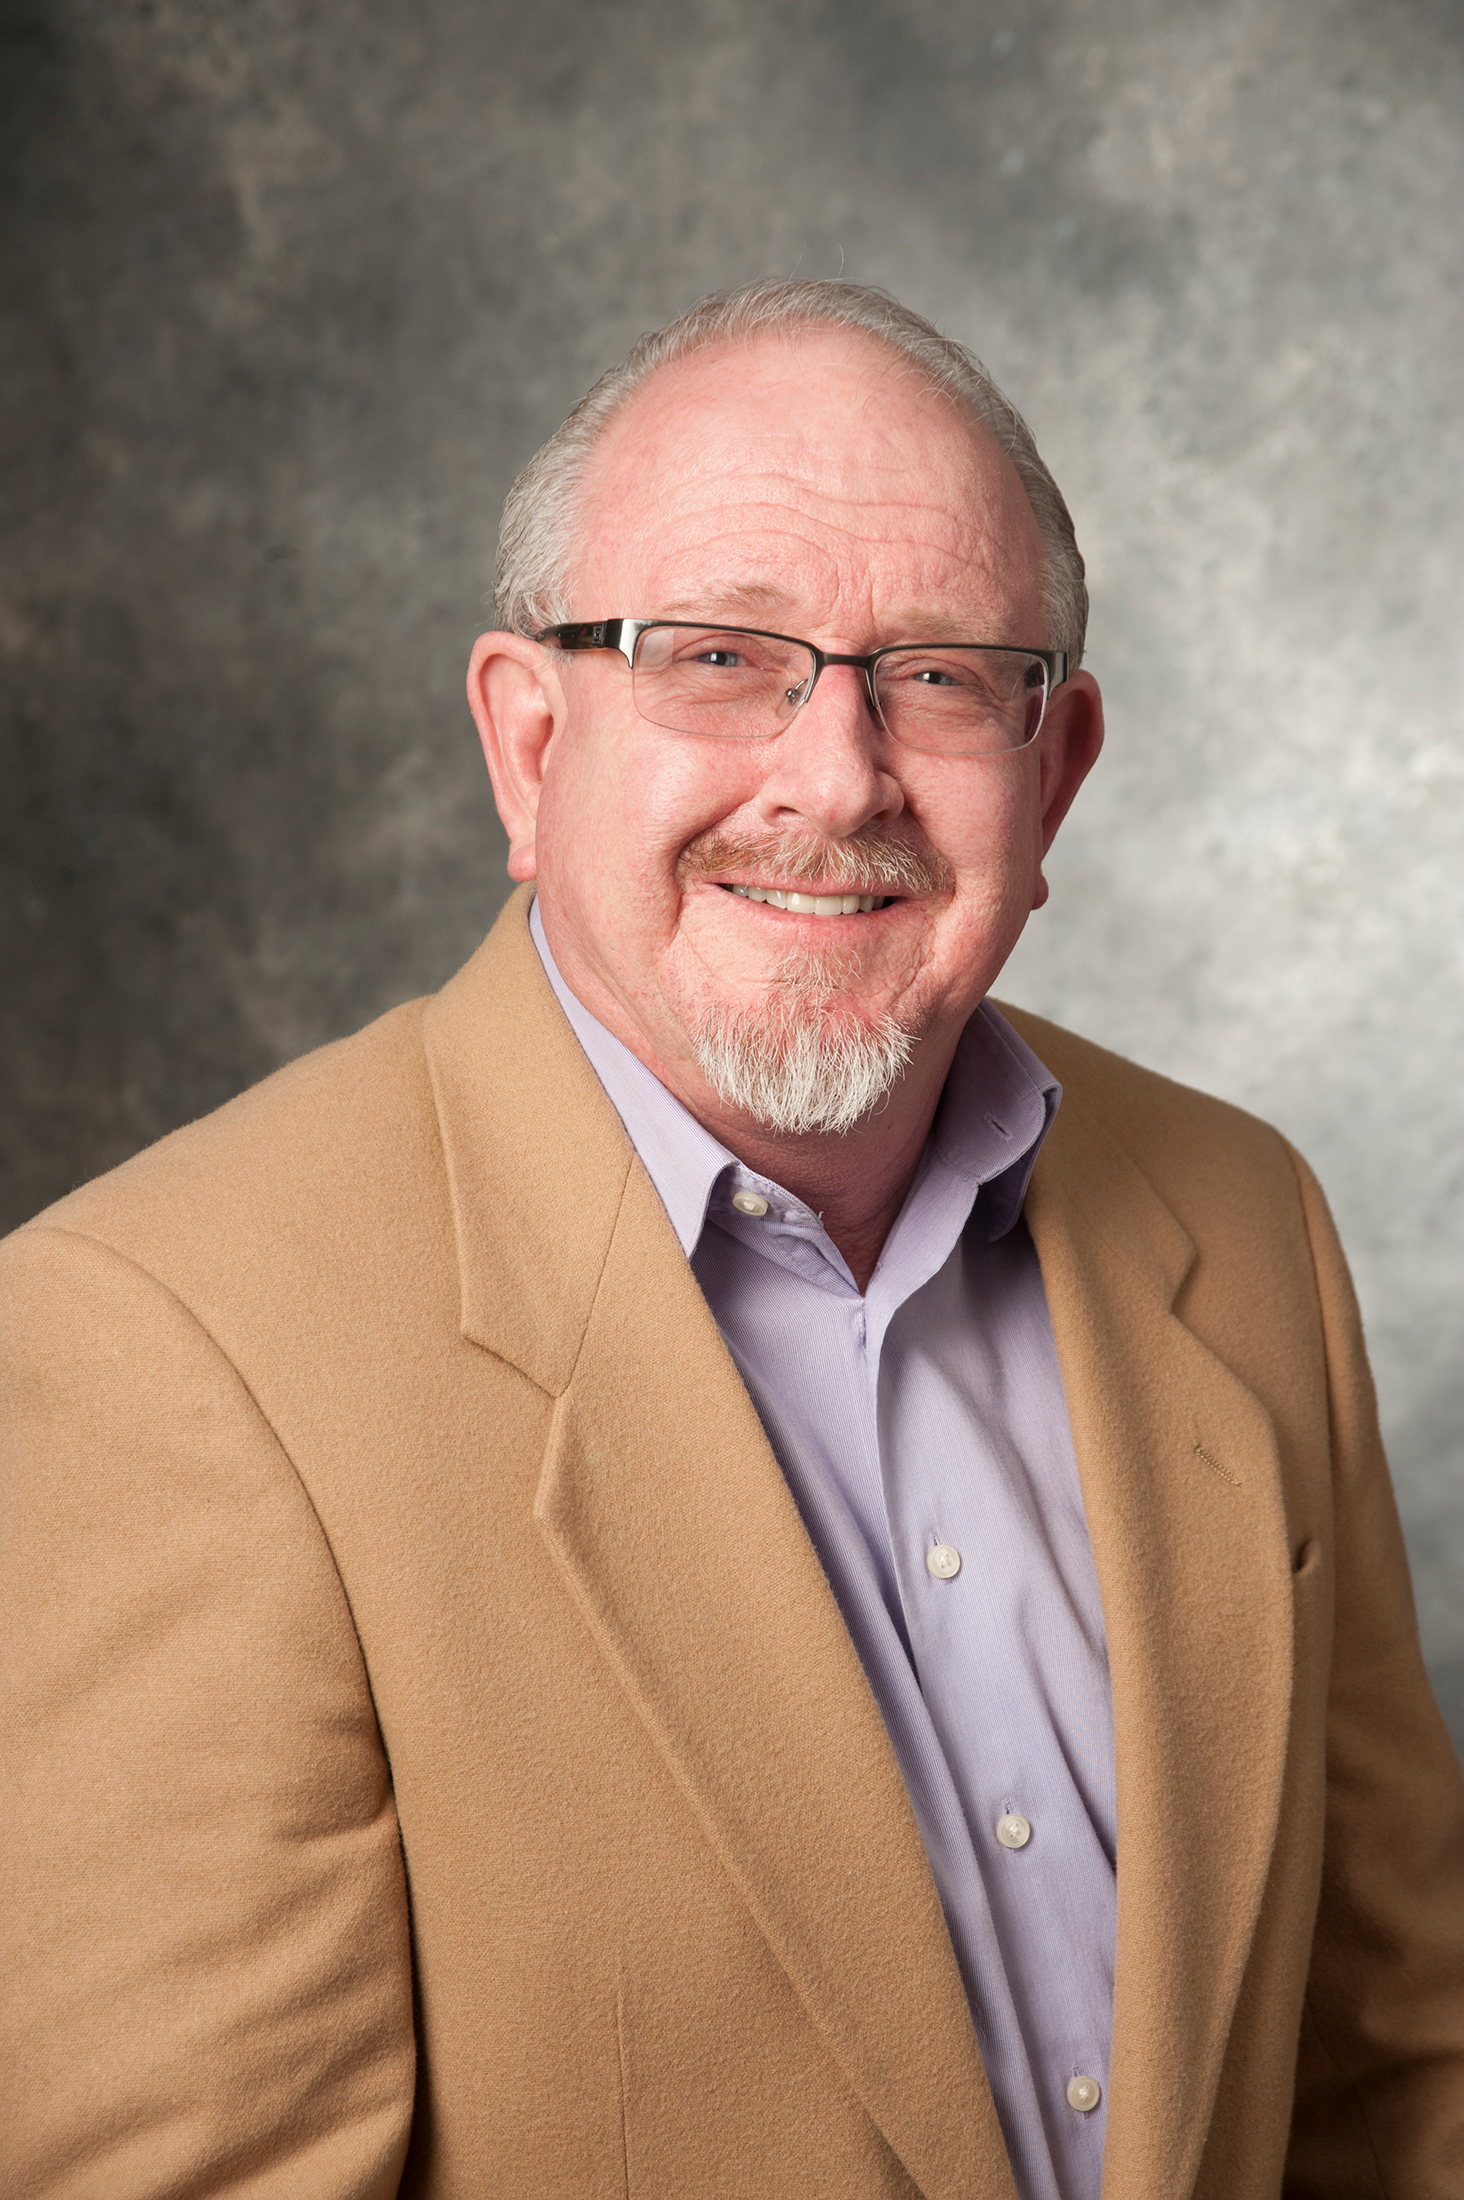 A headshot of Scott Kingsley, a member of the Lyle School of Engineering Faculty.